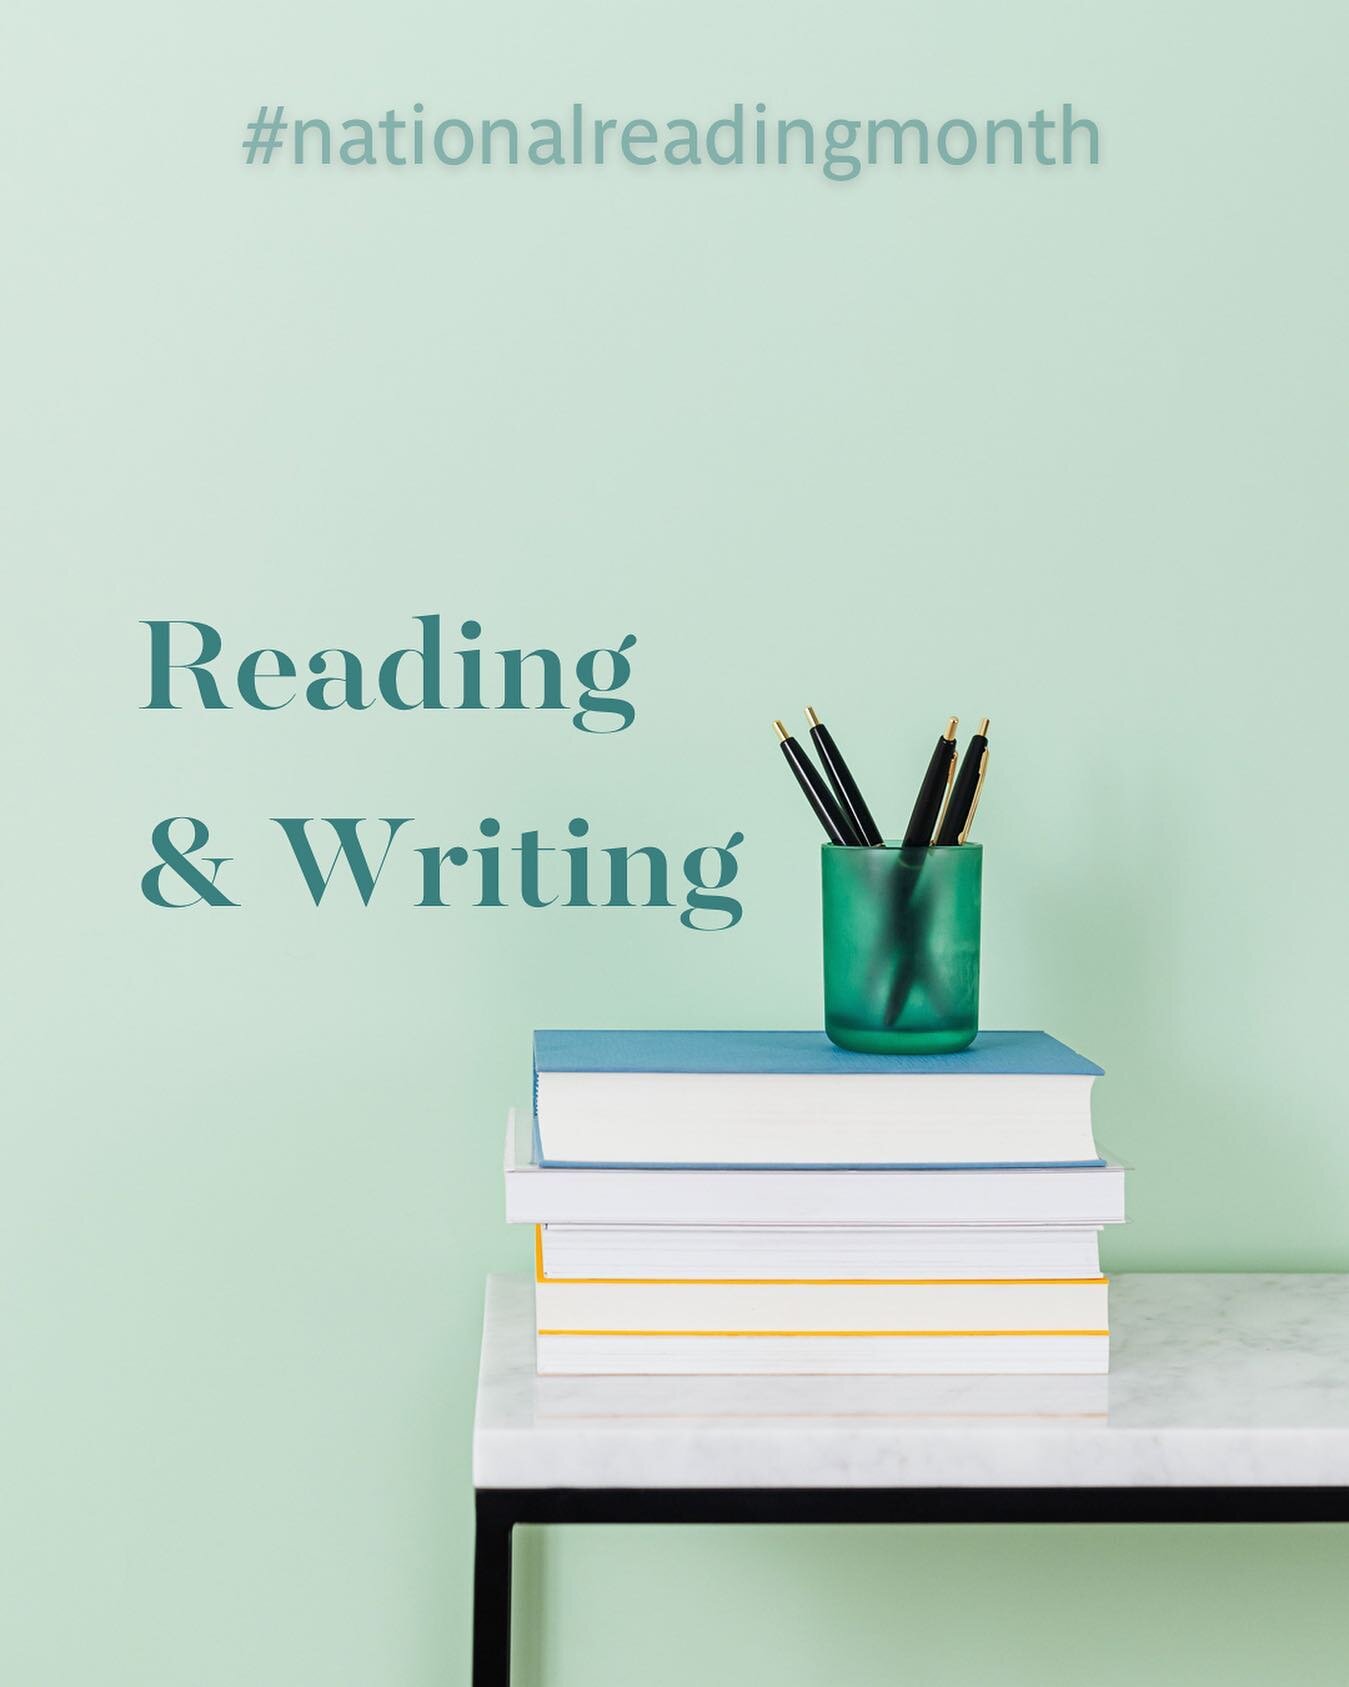 &ldquo;But you&rsquo;re a writing program? Why do you place such an emphasis on reading?&rdquo;
In essence, reading is seeing great writing. When children spend time reading thoughtfully, they simultaneously practice many writing skills as they expan